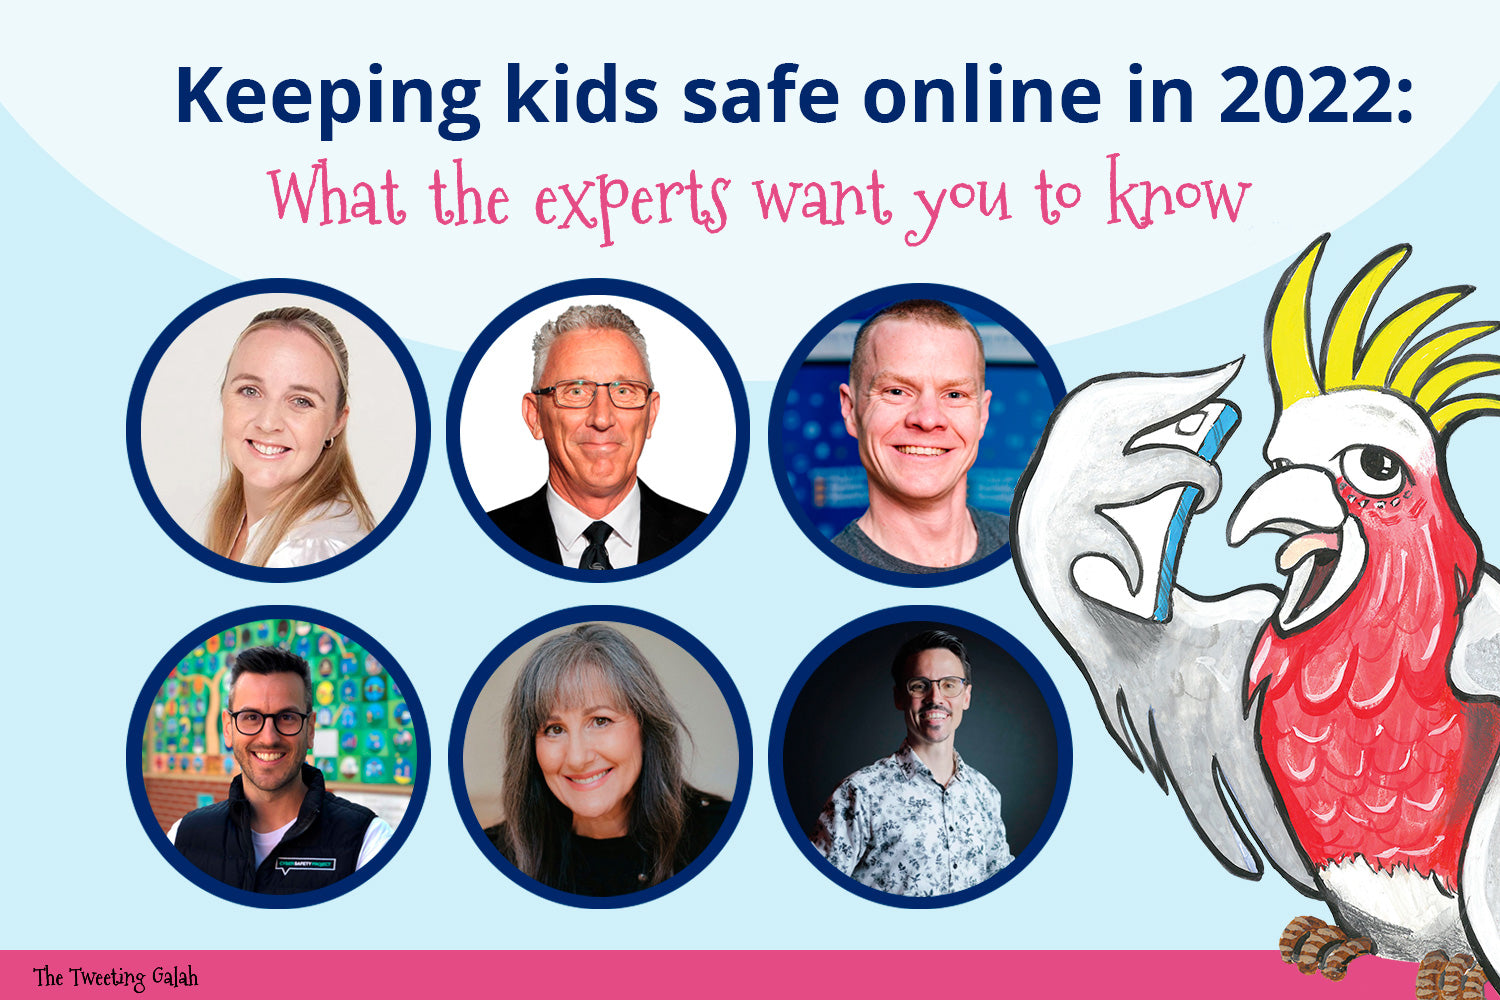 Keeping kids safe online in 2022: What the experts want you to know